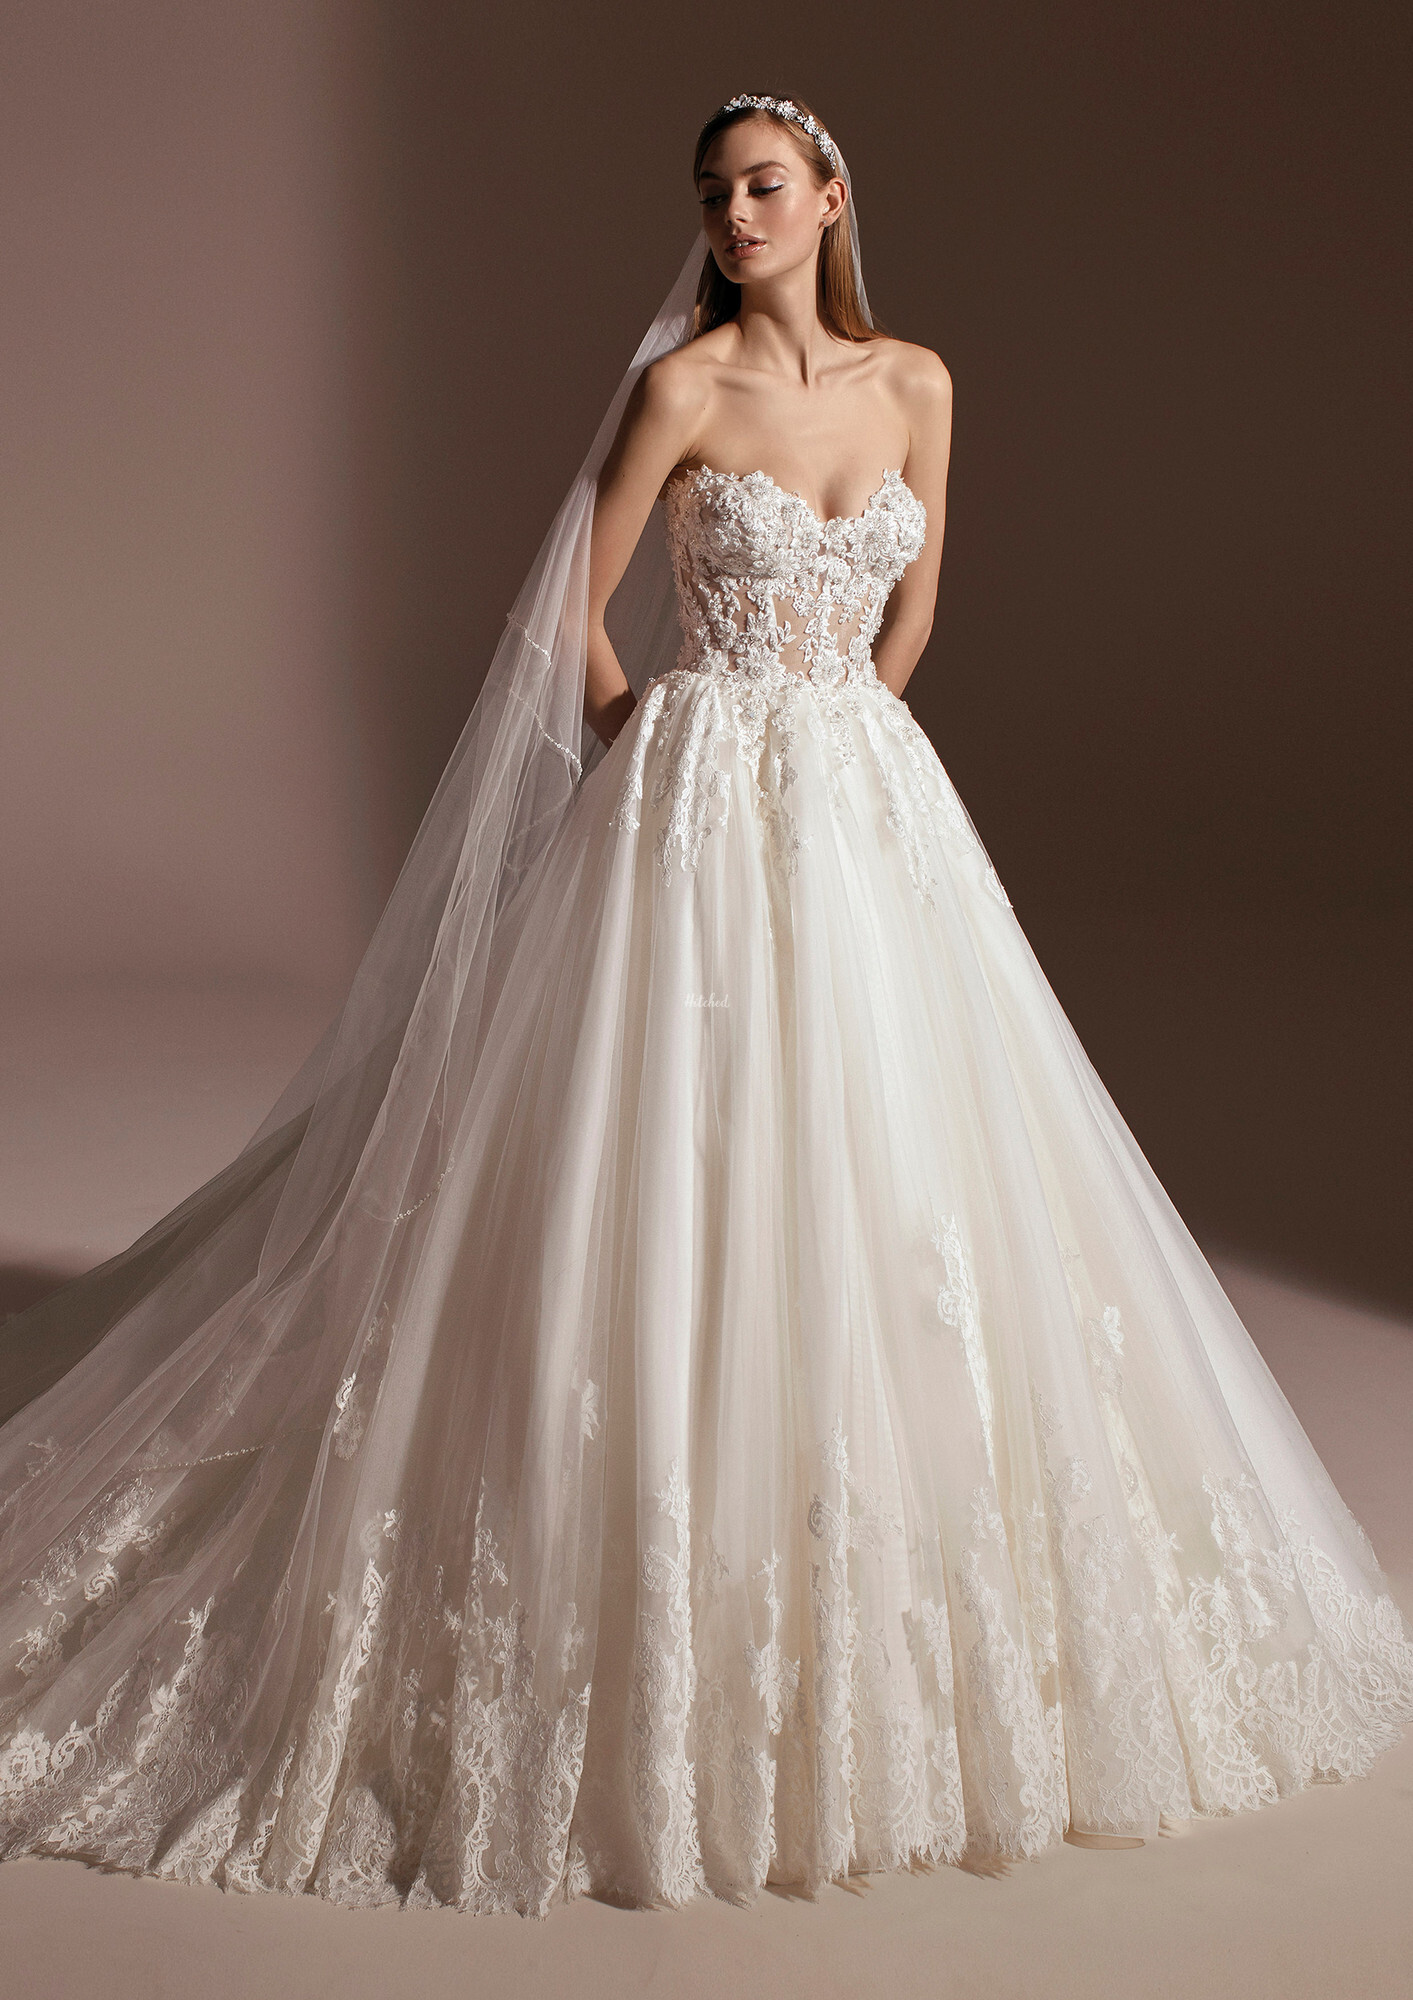 FLORENCIA Wedding Dress from Pronovias - hitched.co.uk